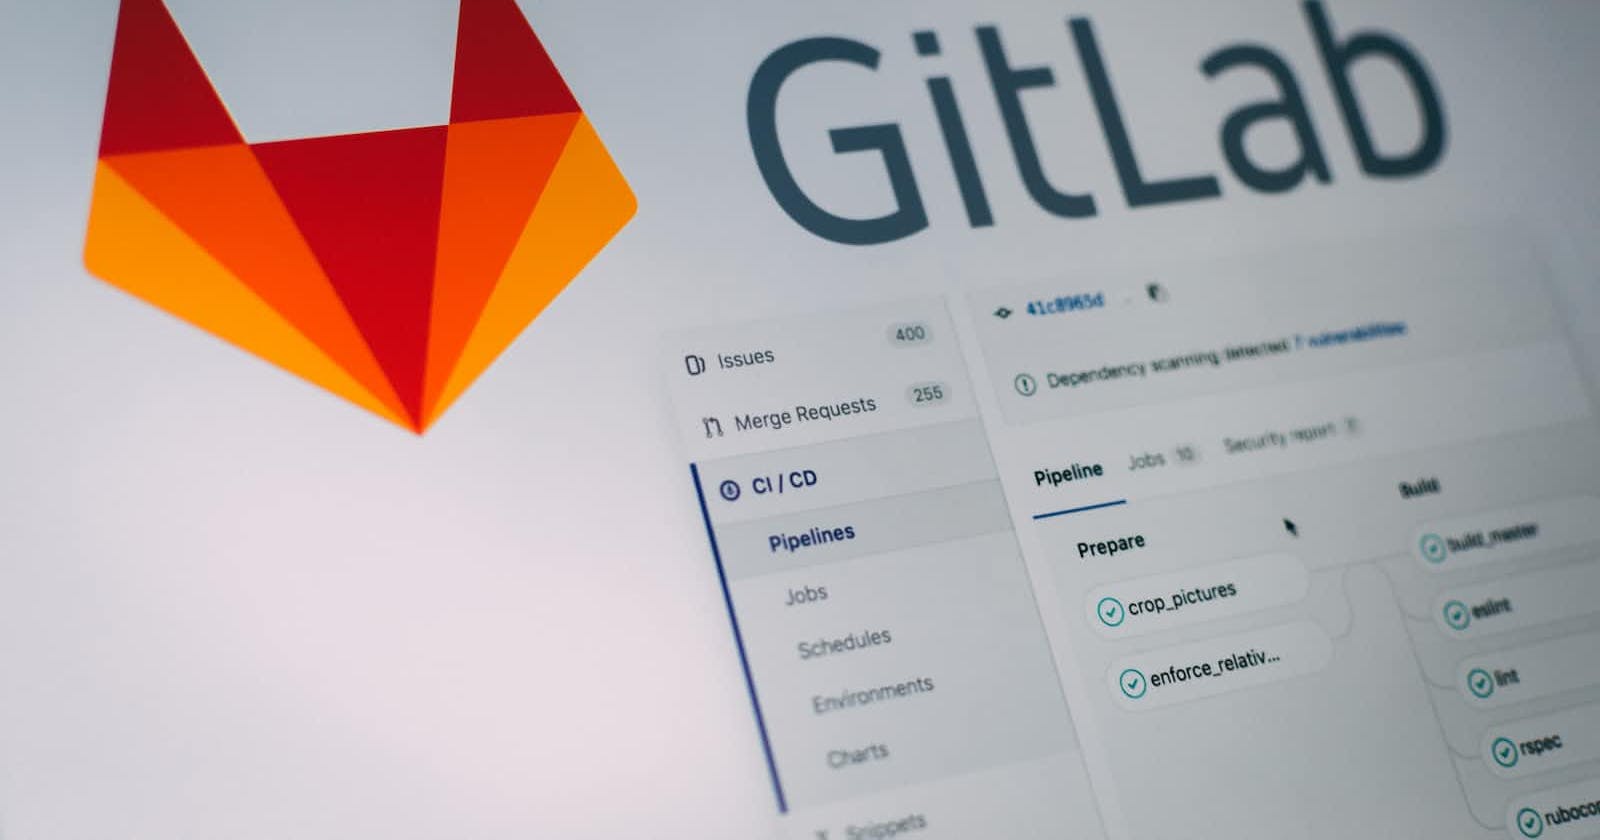 Day 6: Configuring GitLab Runners and Job Artifacts